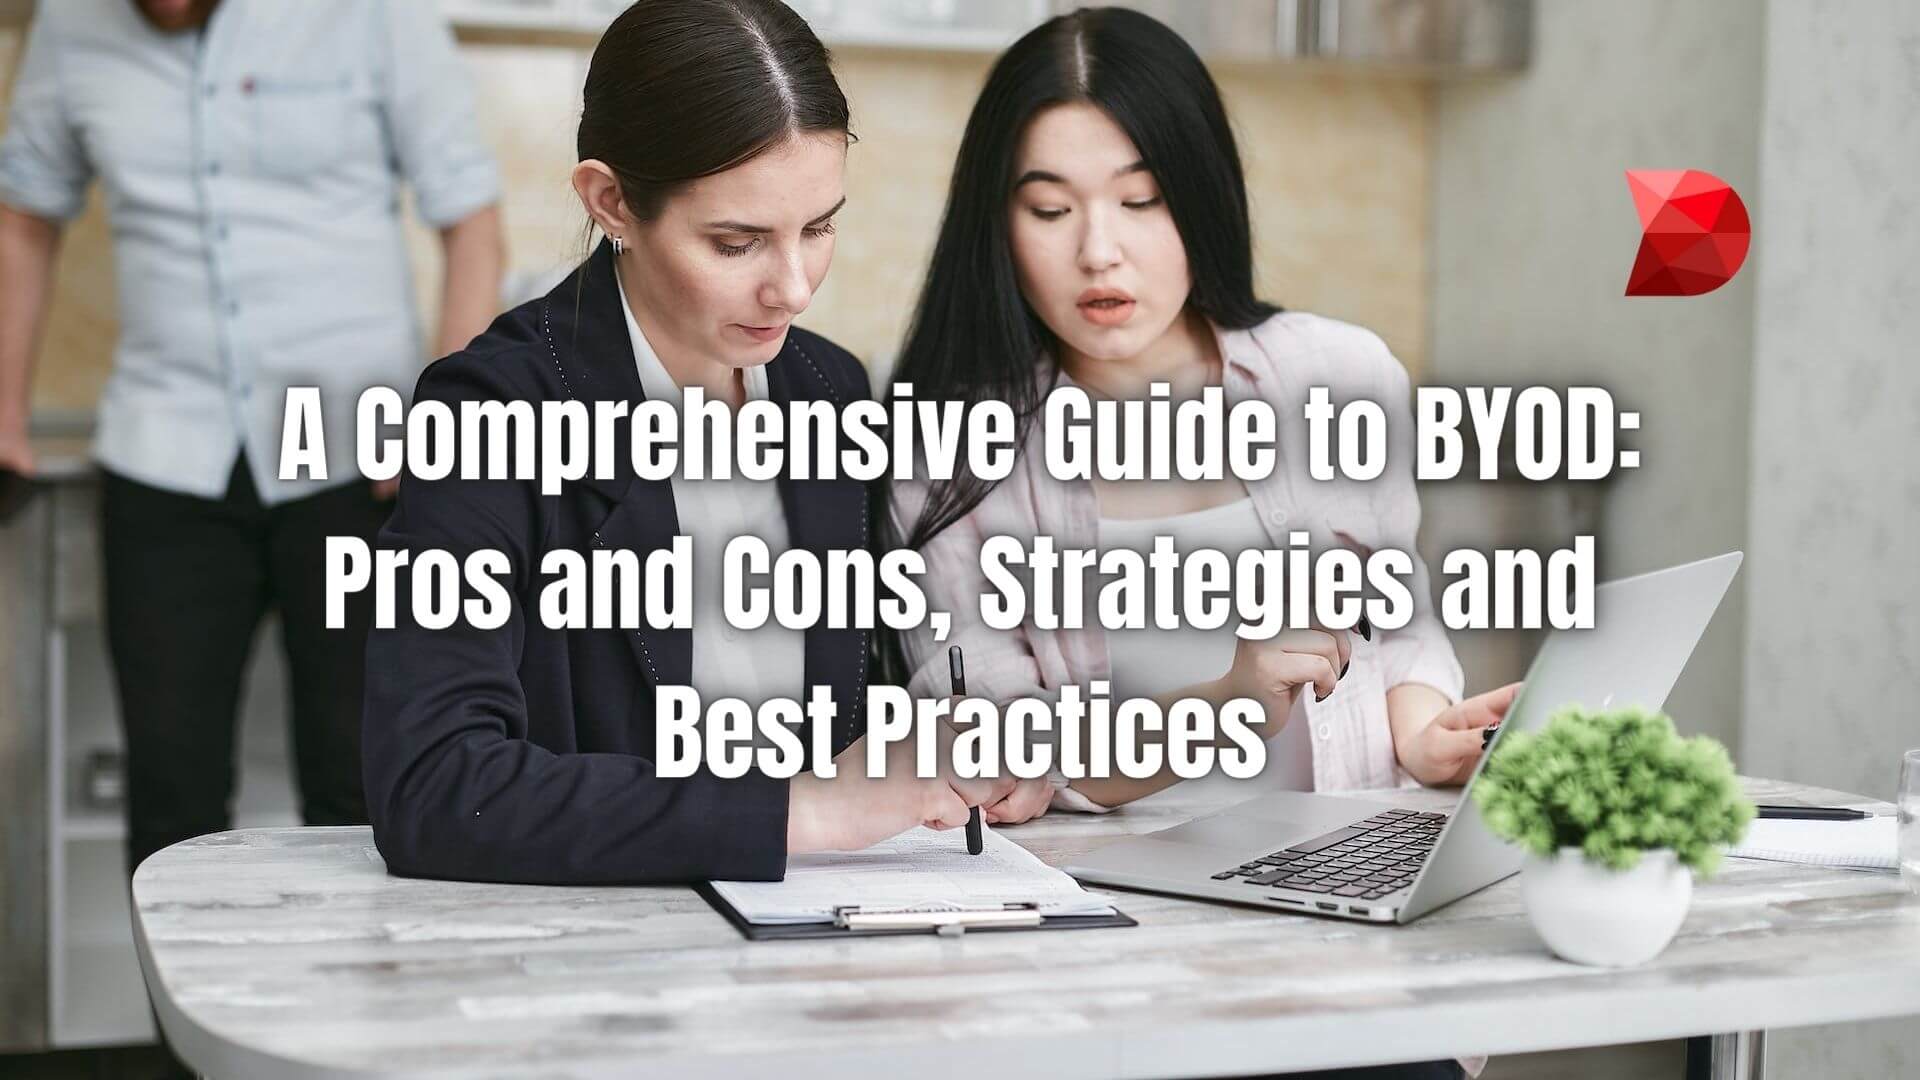 Uncover the ins and outs of BYOD! Click here to learn the pros and cons, strategies, and best practices in this comprehensive guide.